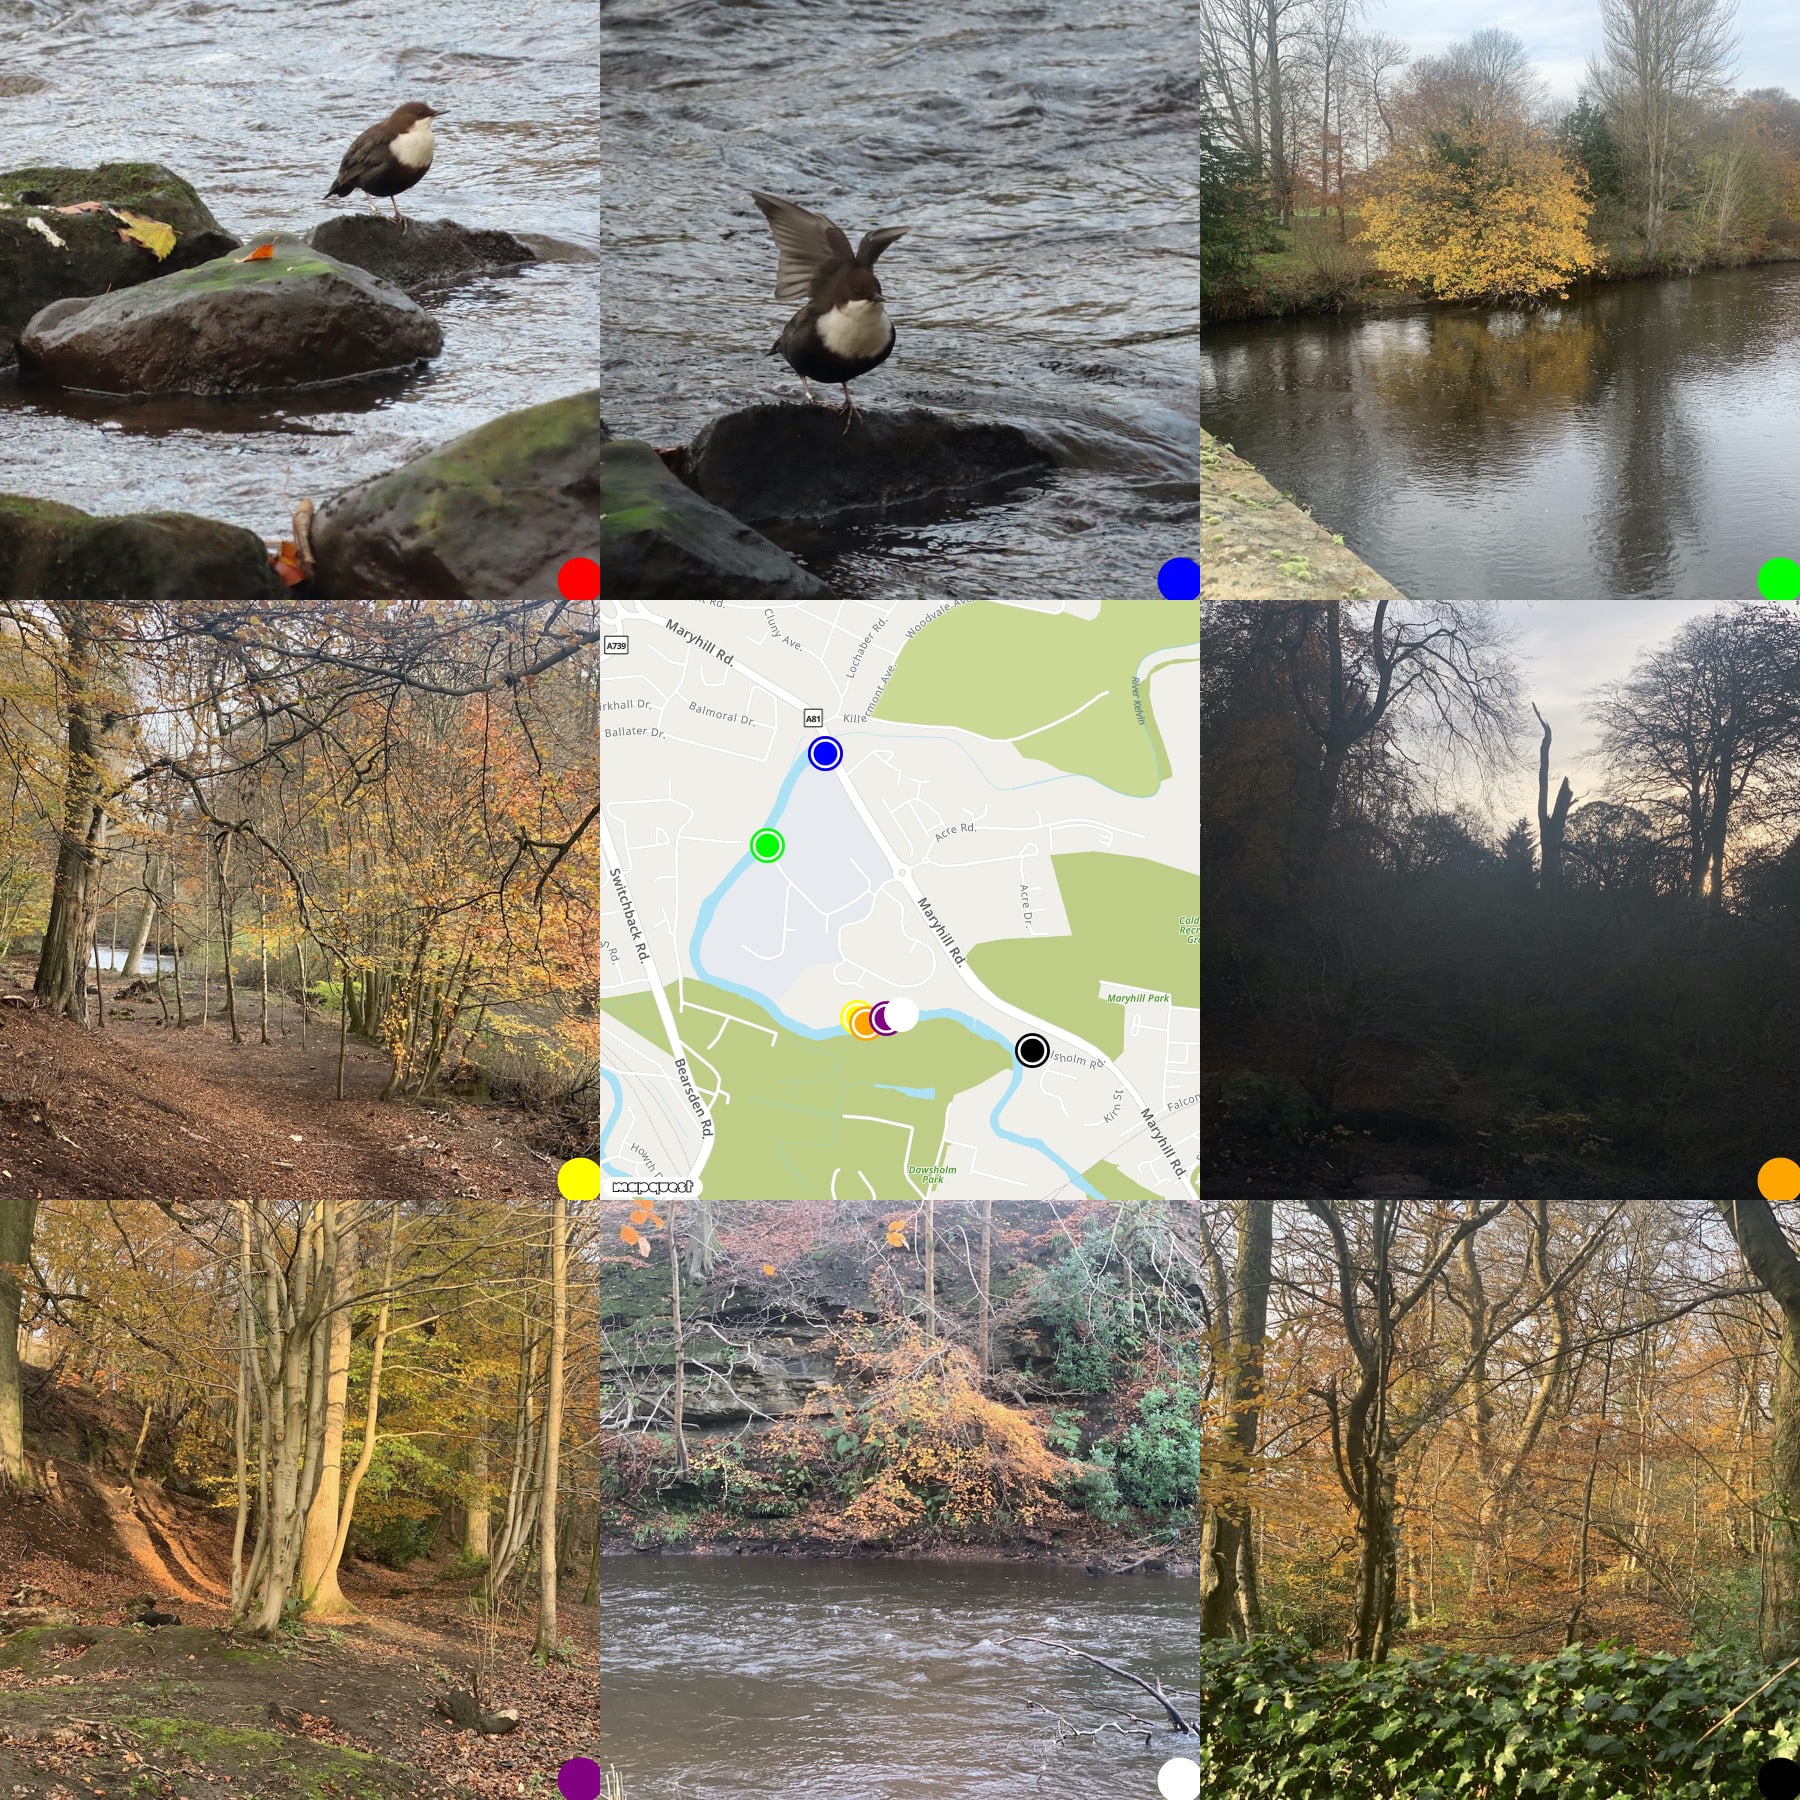 grid of photos around a map of where they were taken. Dipper, Dipper, Beach tree beside river, river path, silhouette of trees, beech tree & shadow, river and beech tree overhanging, beech woods